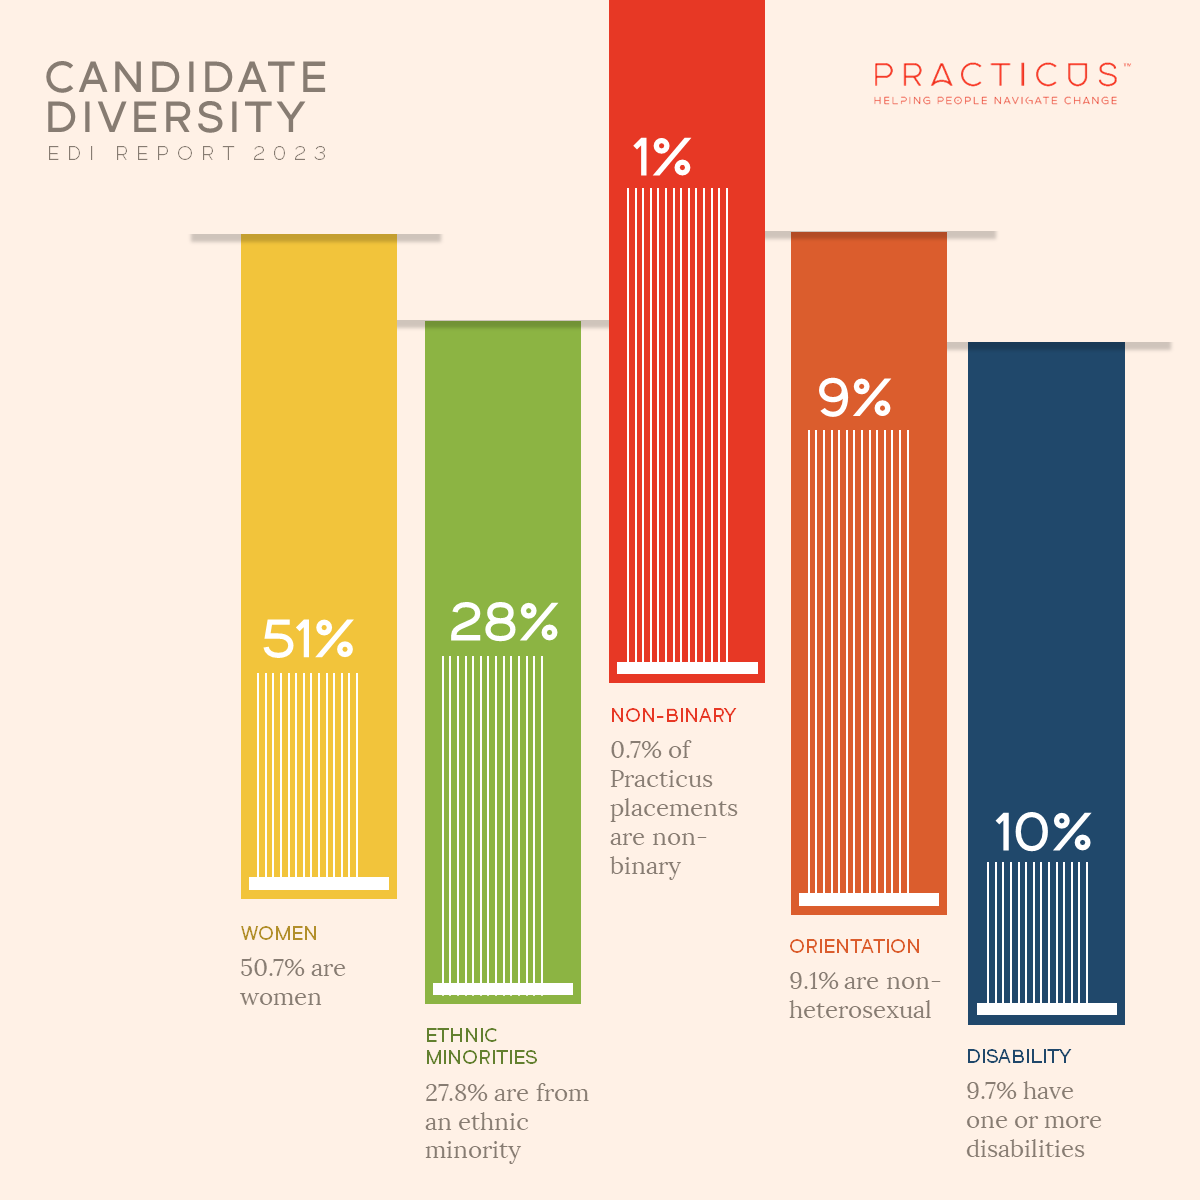 Key findings of Practicus candidate placement diversity